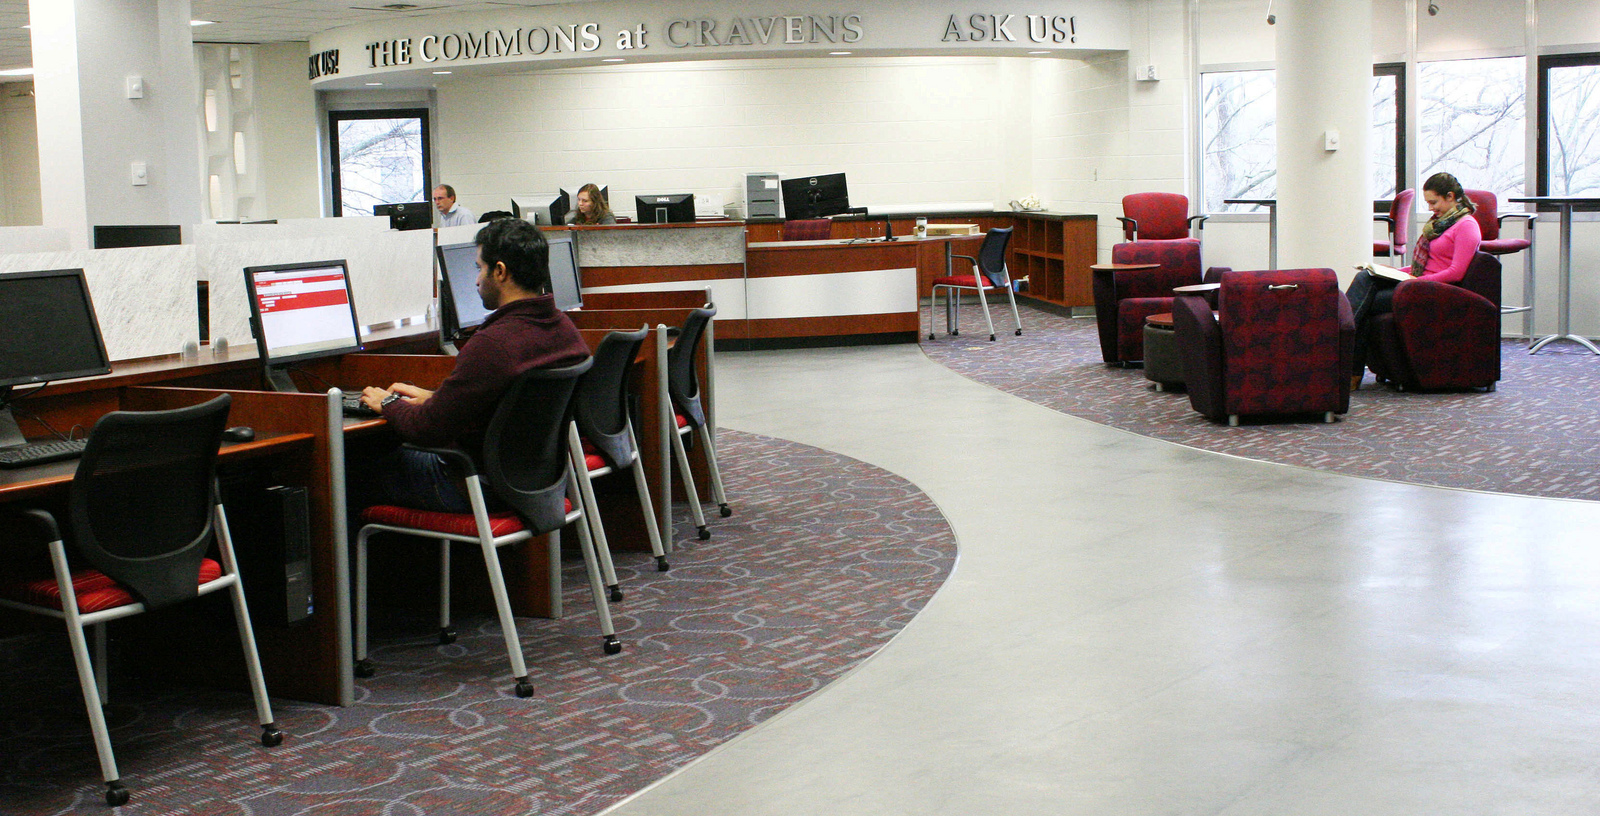 Library Technical Services